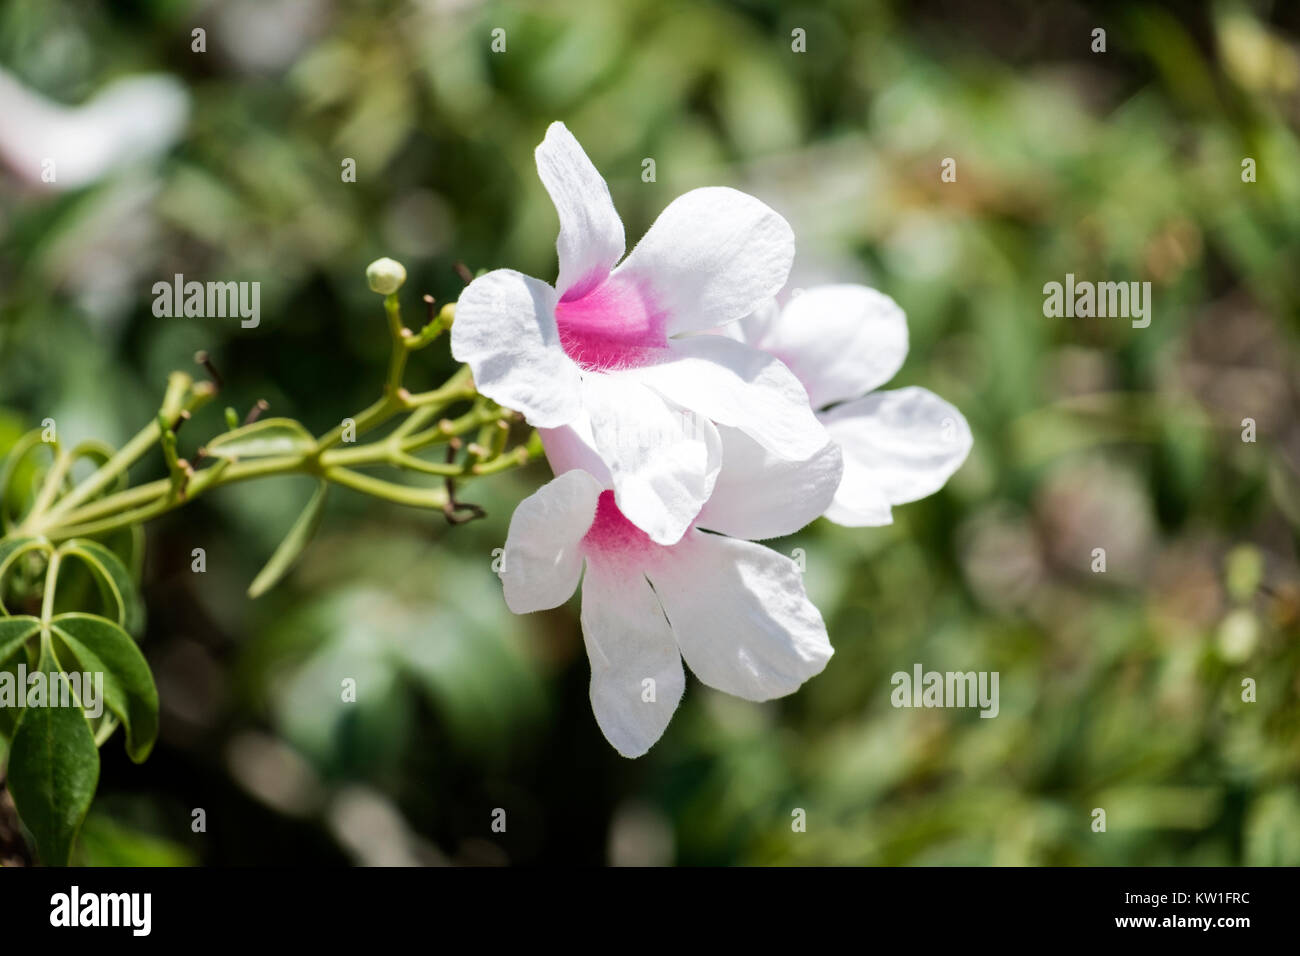 White delicate flowers with pink hearts (Pandorea jasminoides) Stock Photo